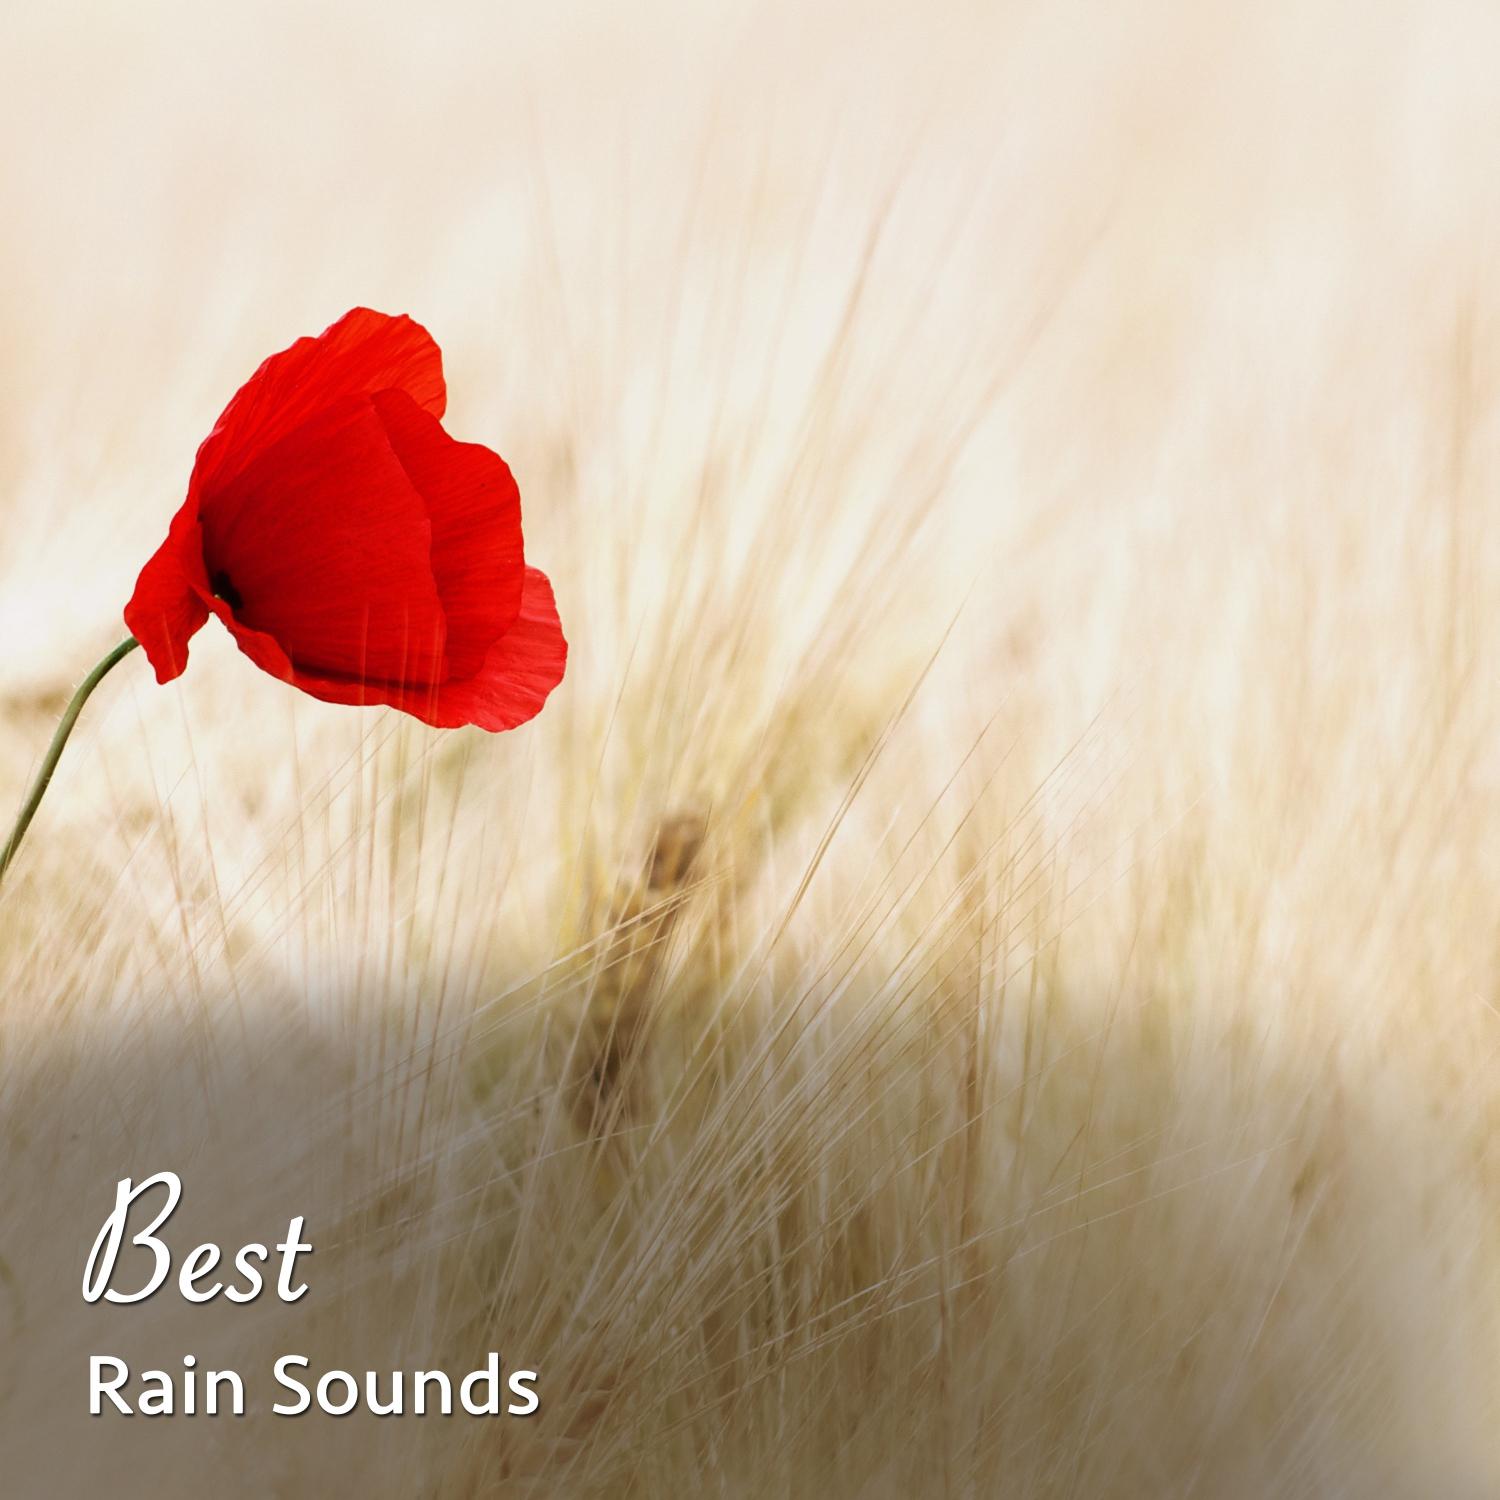 #1 Best Rain and Nature Sounds - Heavy Rain, Storms and Lightning